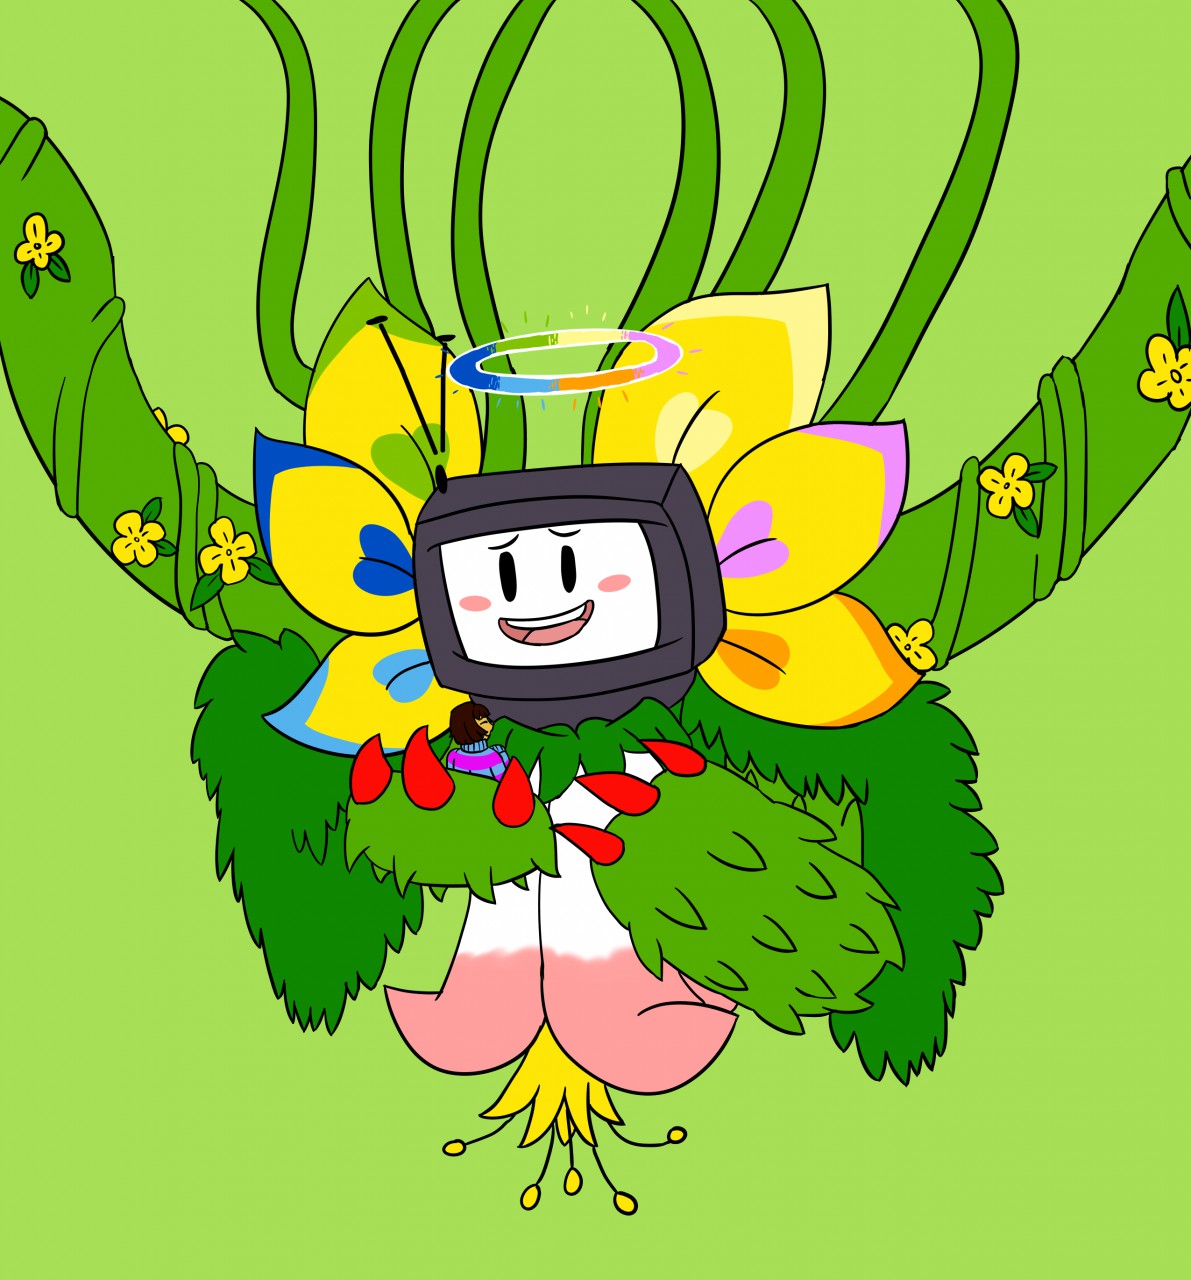 Ut Alpha Flowey By Madcat2000 Fur Affinity Dot Net With tenor, maker of gif keyboard, add popular omega flowey animated gifs to your conversations. ut alpha flowey by madcat2000 fur